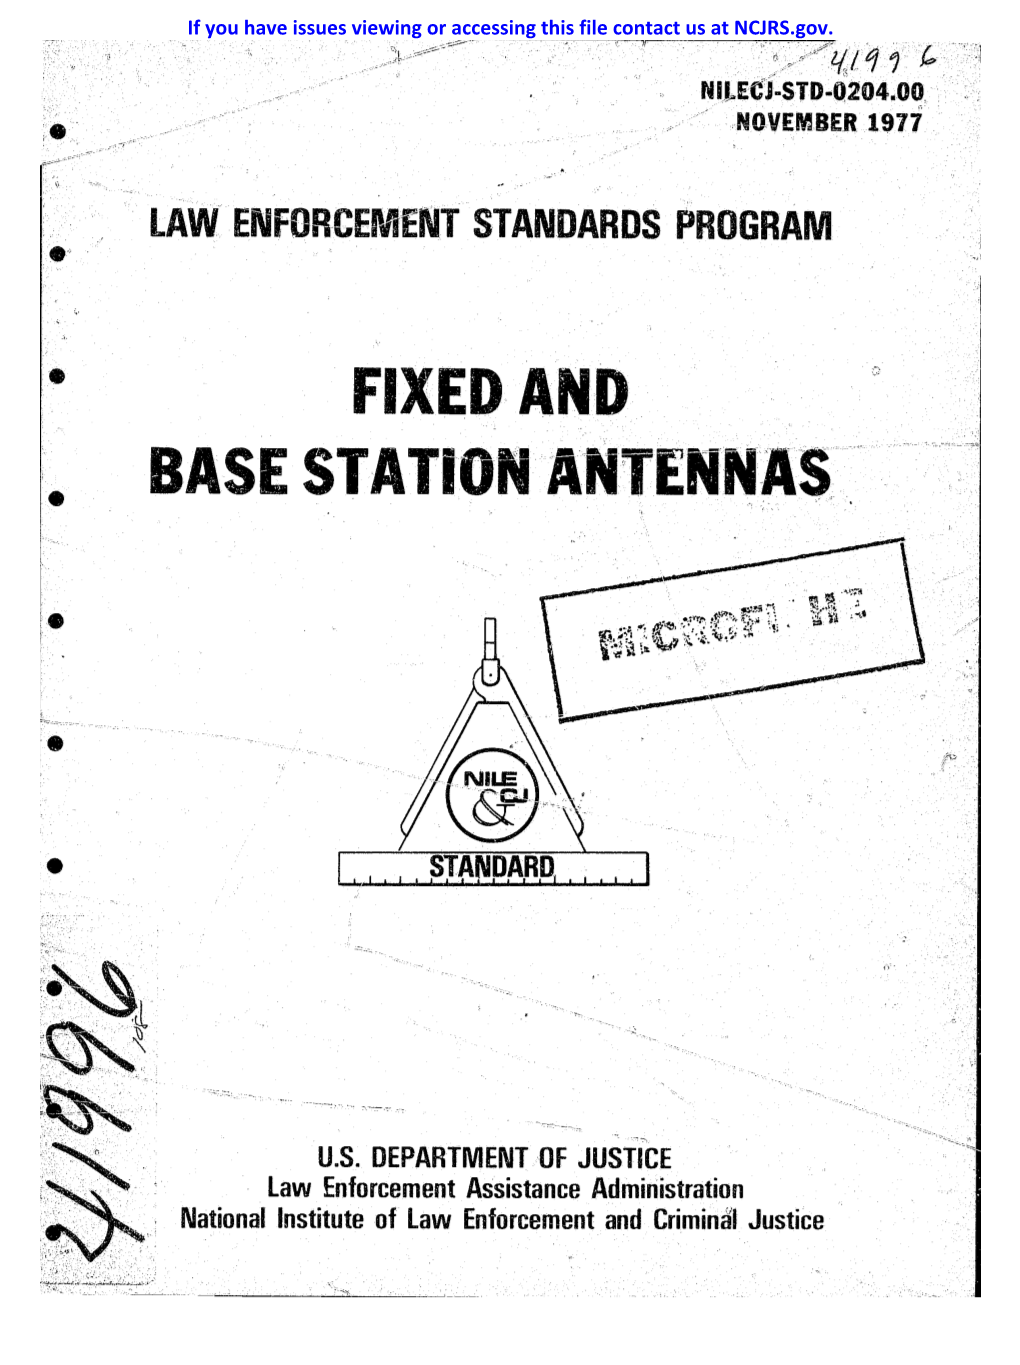 Fixed and BASE STATION ANTENNAS